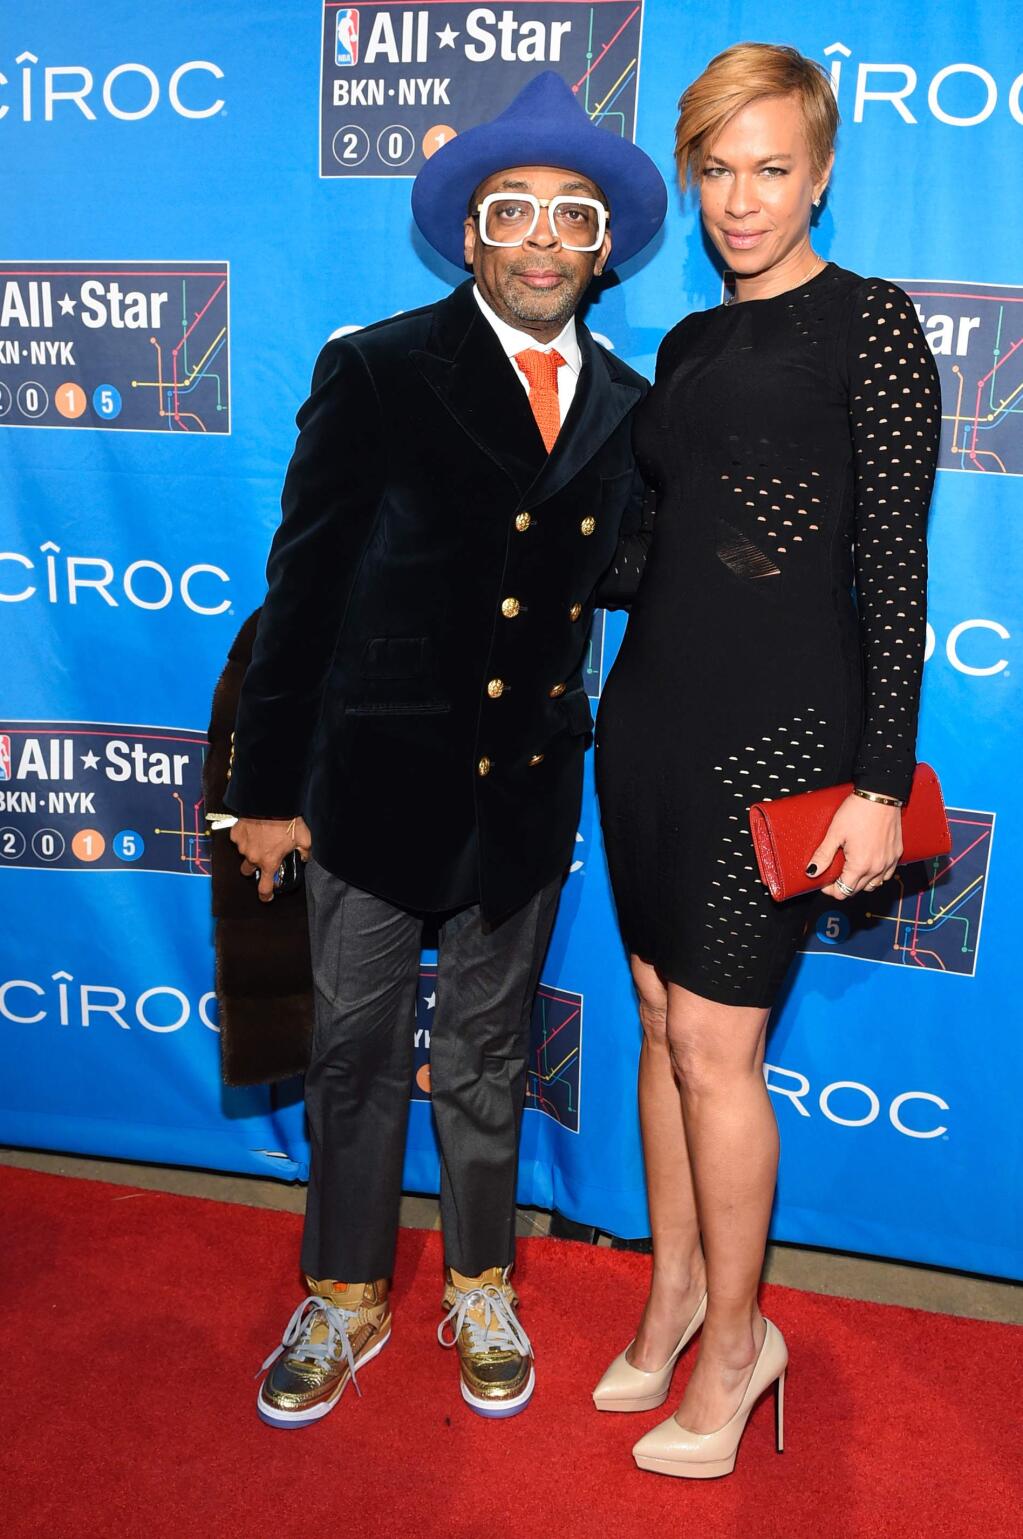 Director Spike Lee, left, and wife Tonya Lewis Lee attend the 2015 NBA All-Star Game at Madison Square Garden on Sunday, Feb. 15, 2015, in New York. (Photo by Scott Roth/Invision/AP)